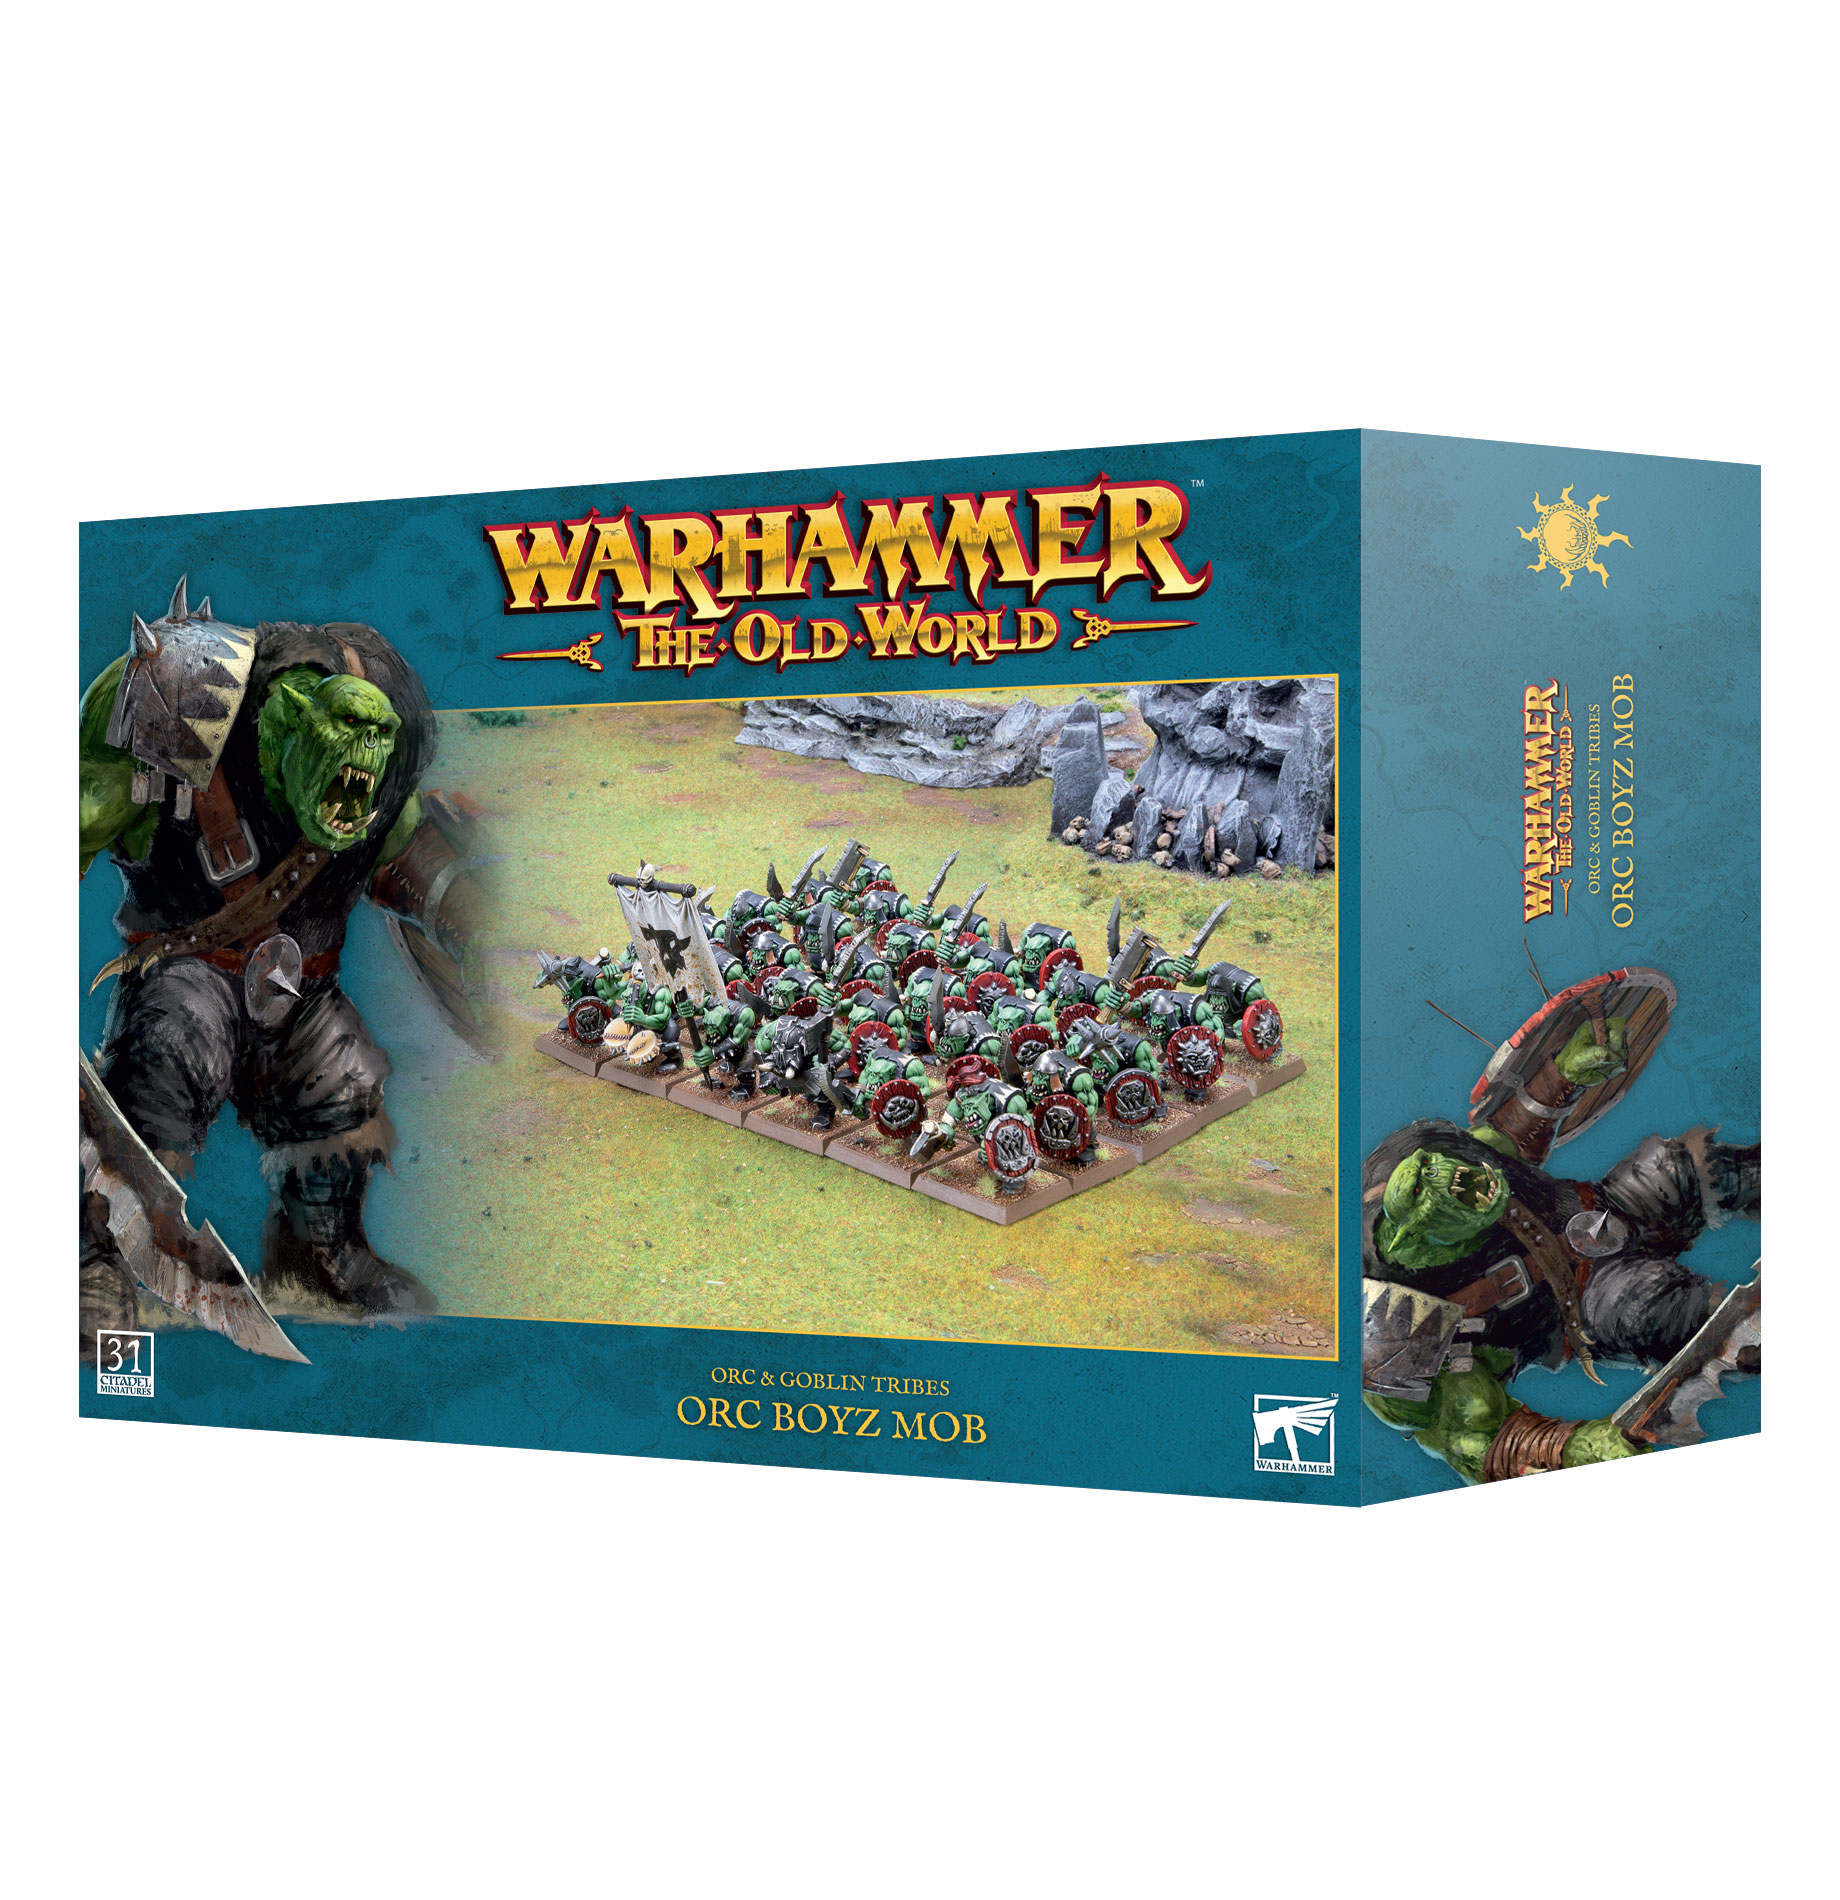 Warhammer: The Old World: Orc & Goblin Tribes: Orc Boyz Mob 